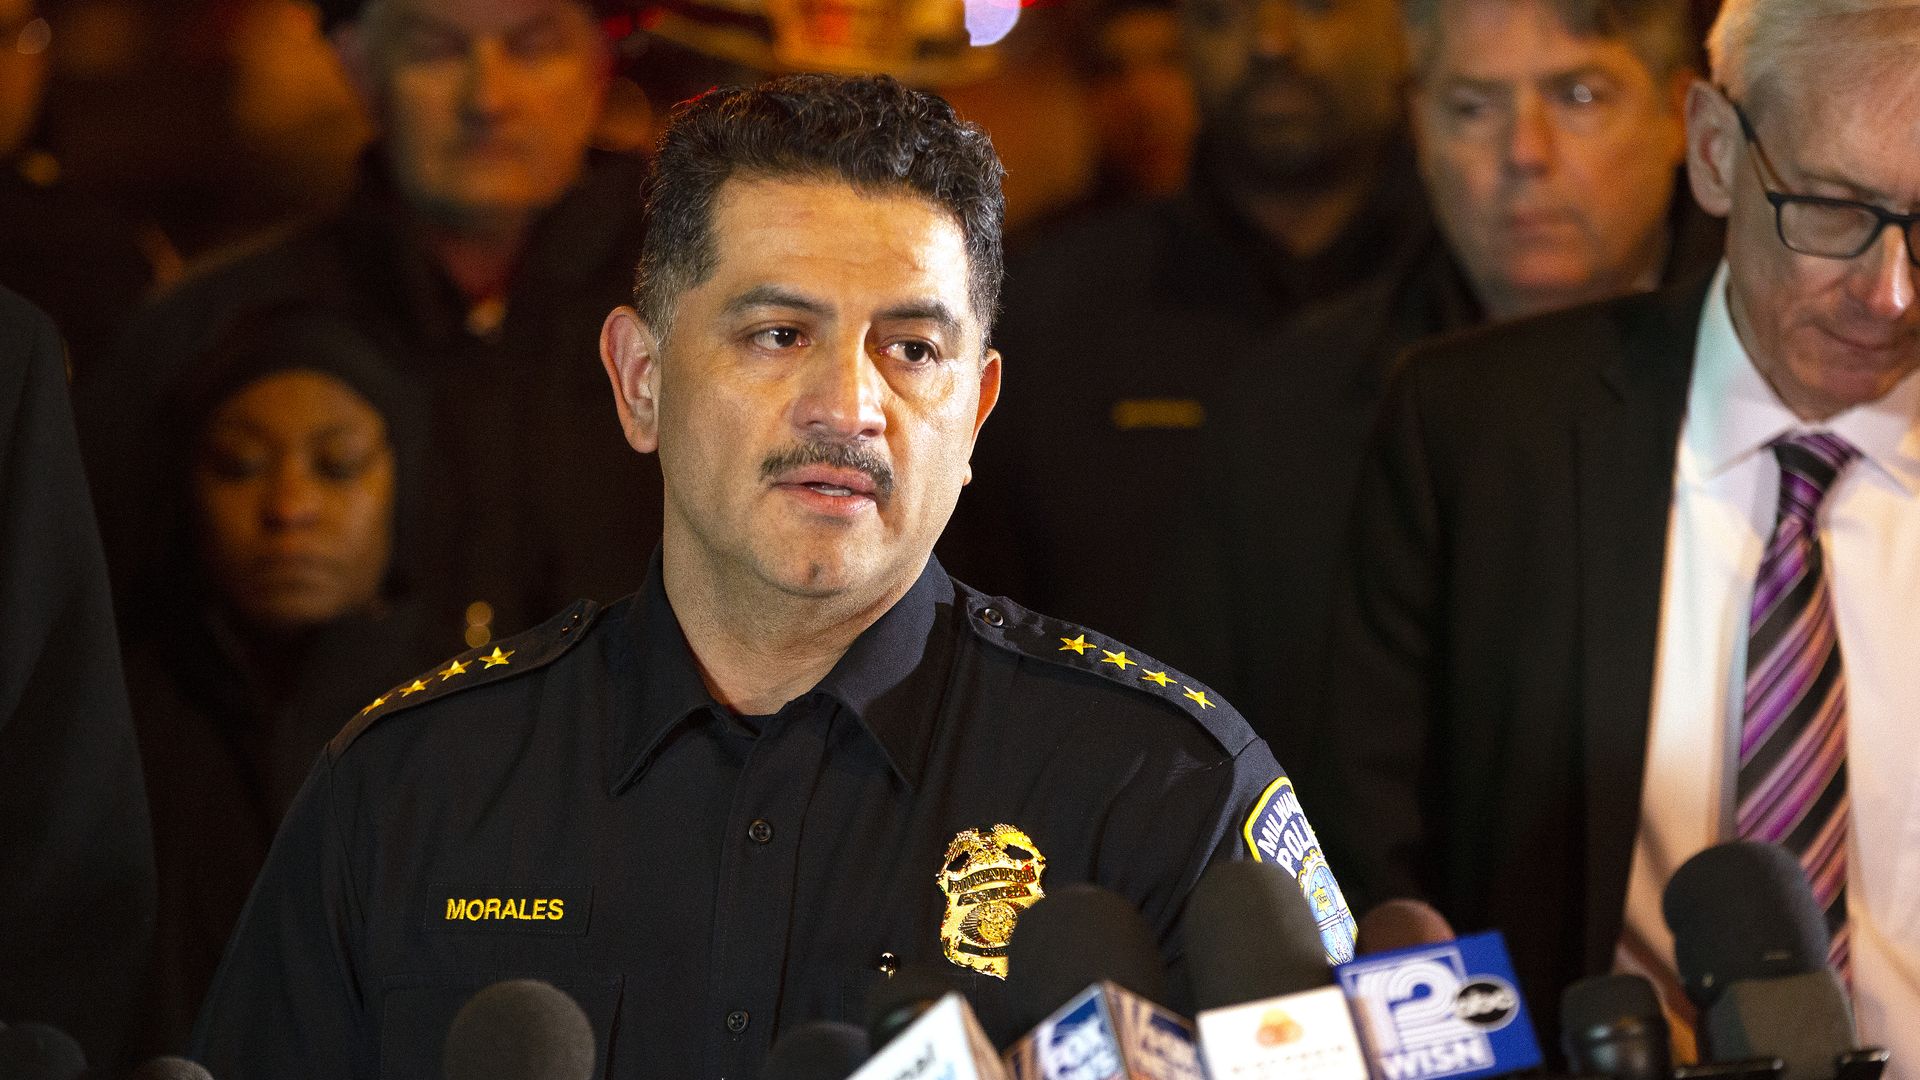 Milwaukee Police Chief Alfonso Morales speaks at a press conference surrounded be people